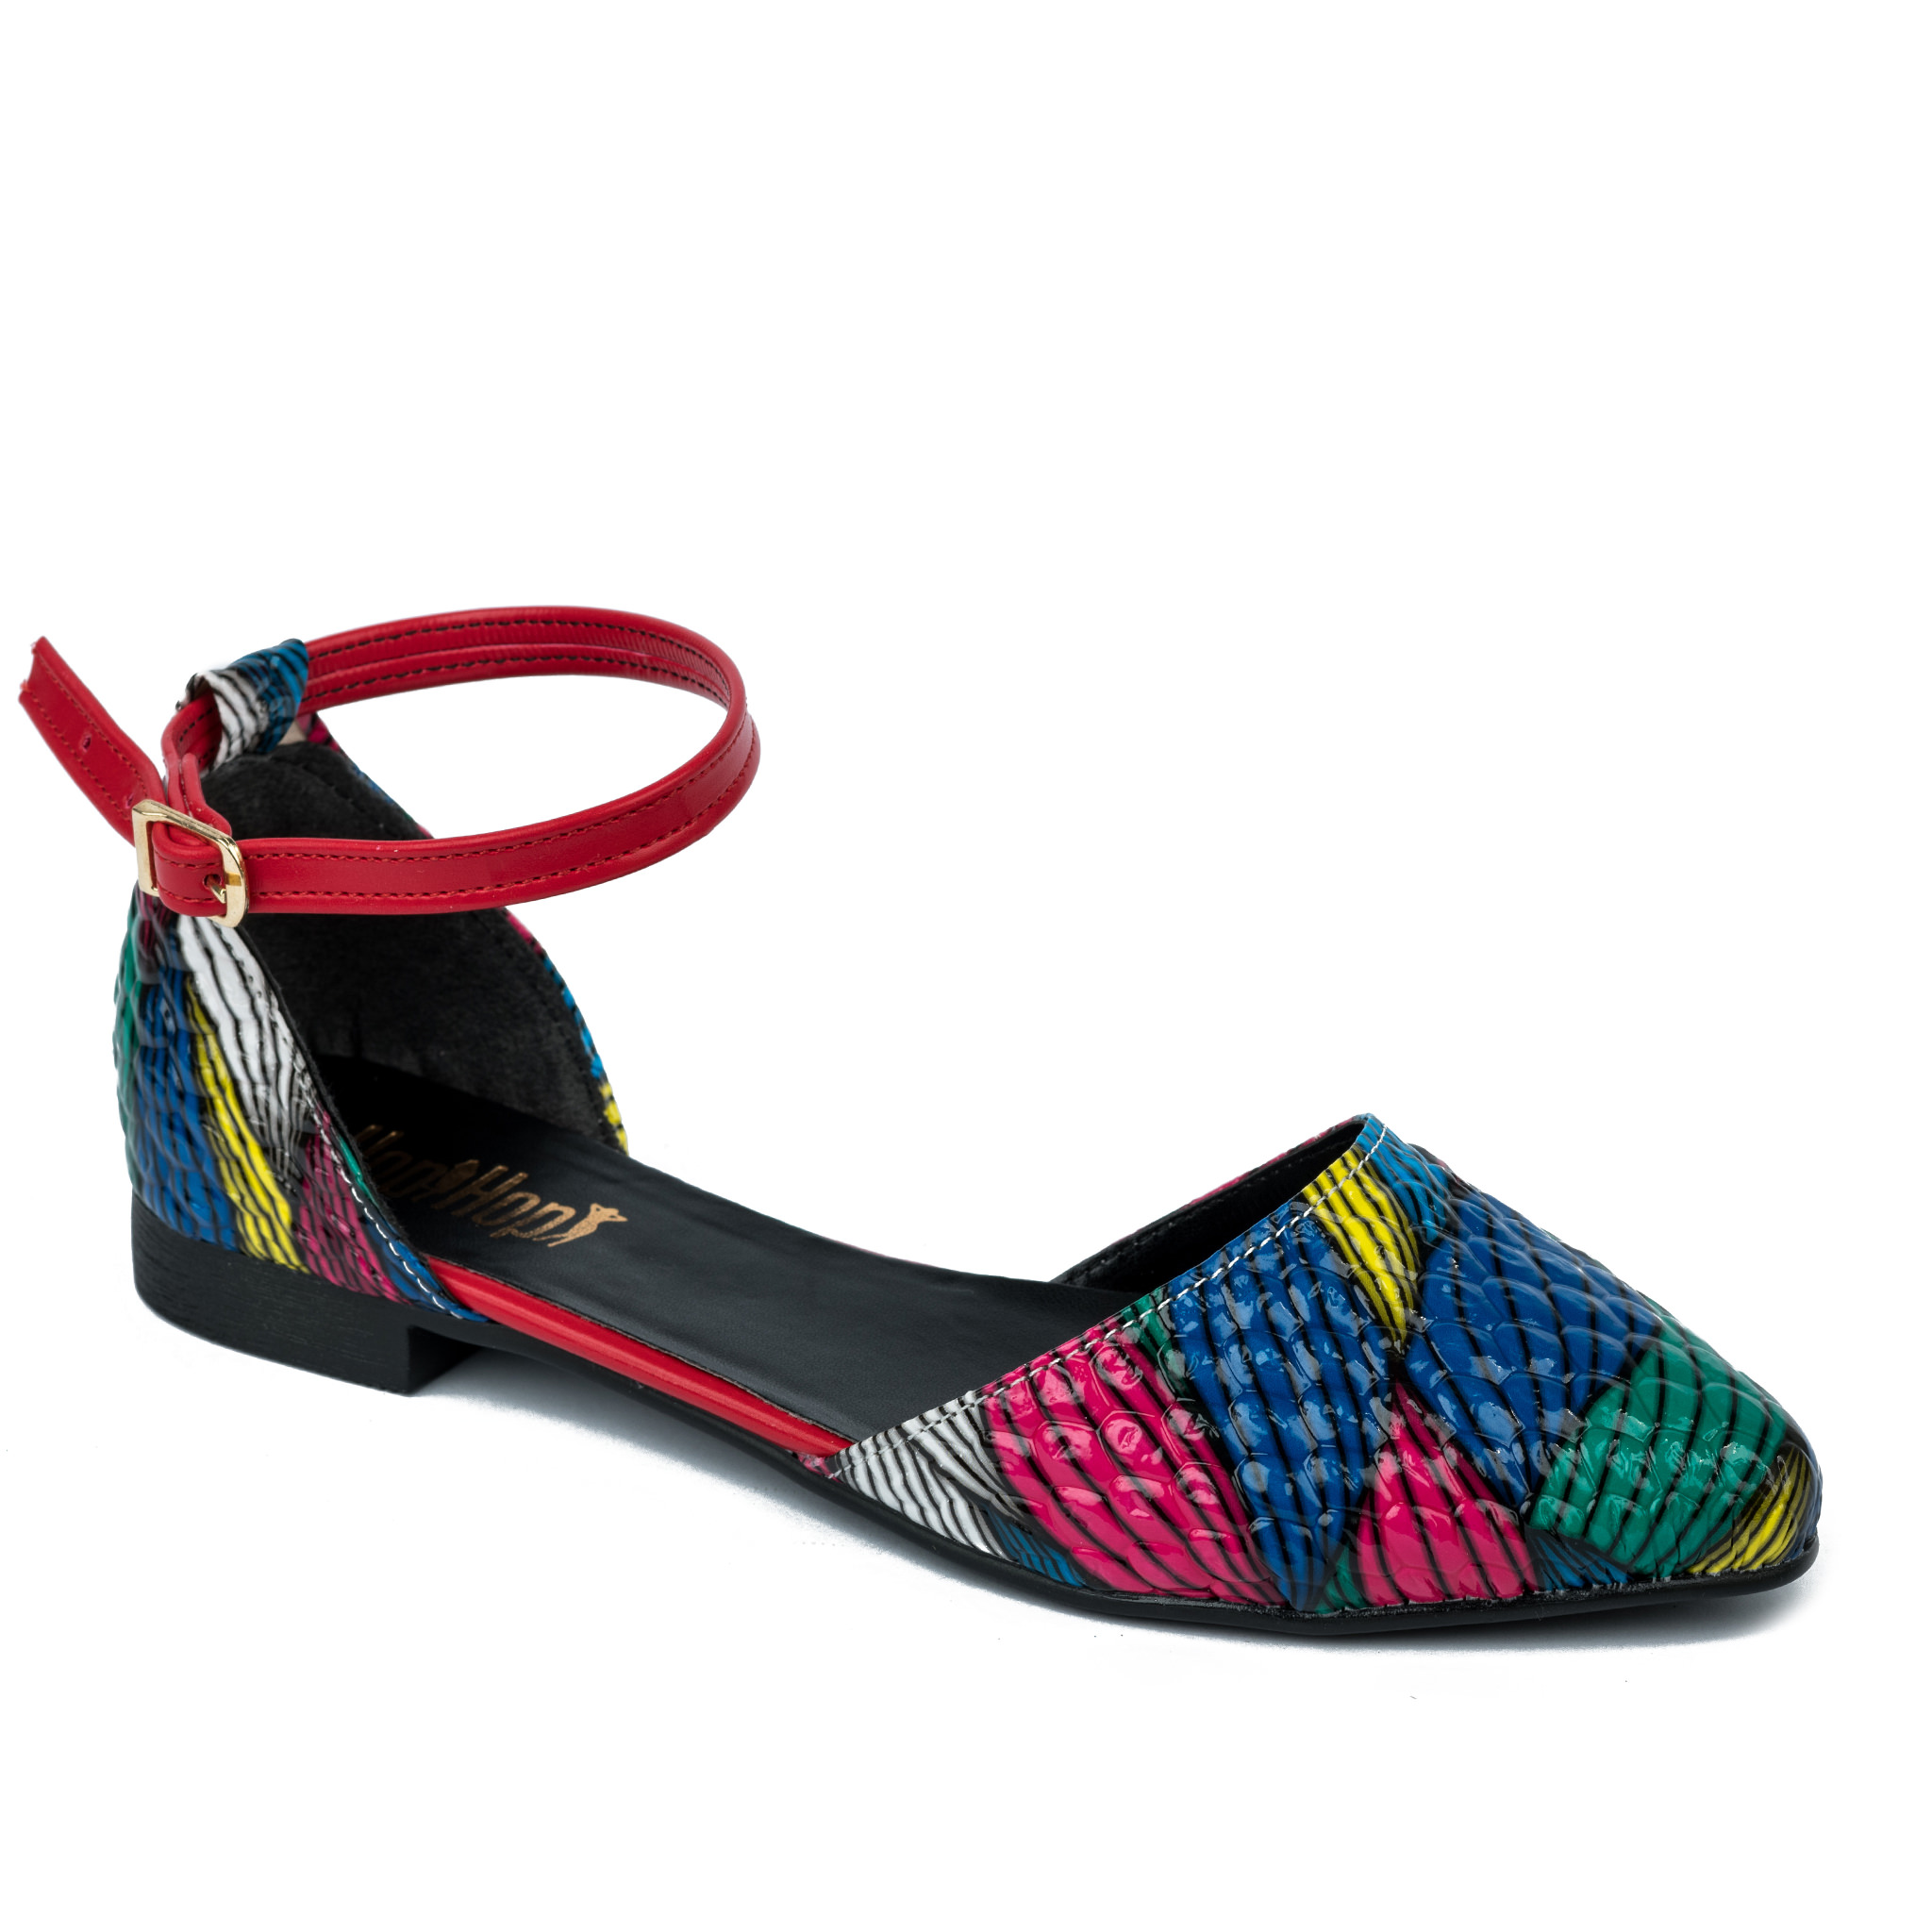 PRINTED FLATS - RED/BLUE